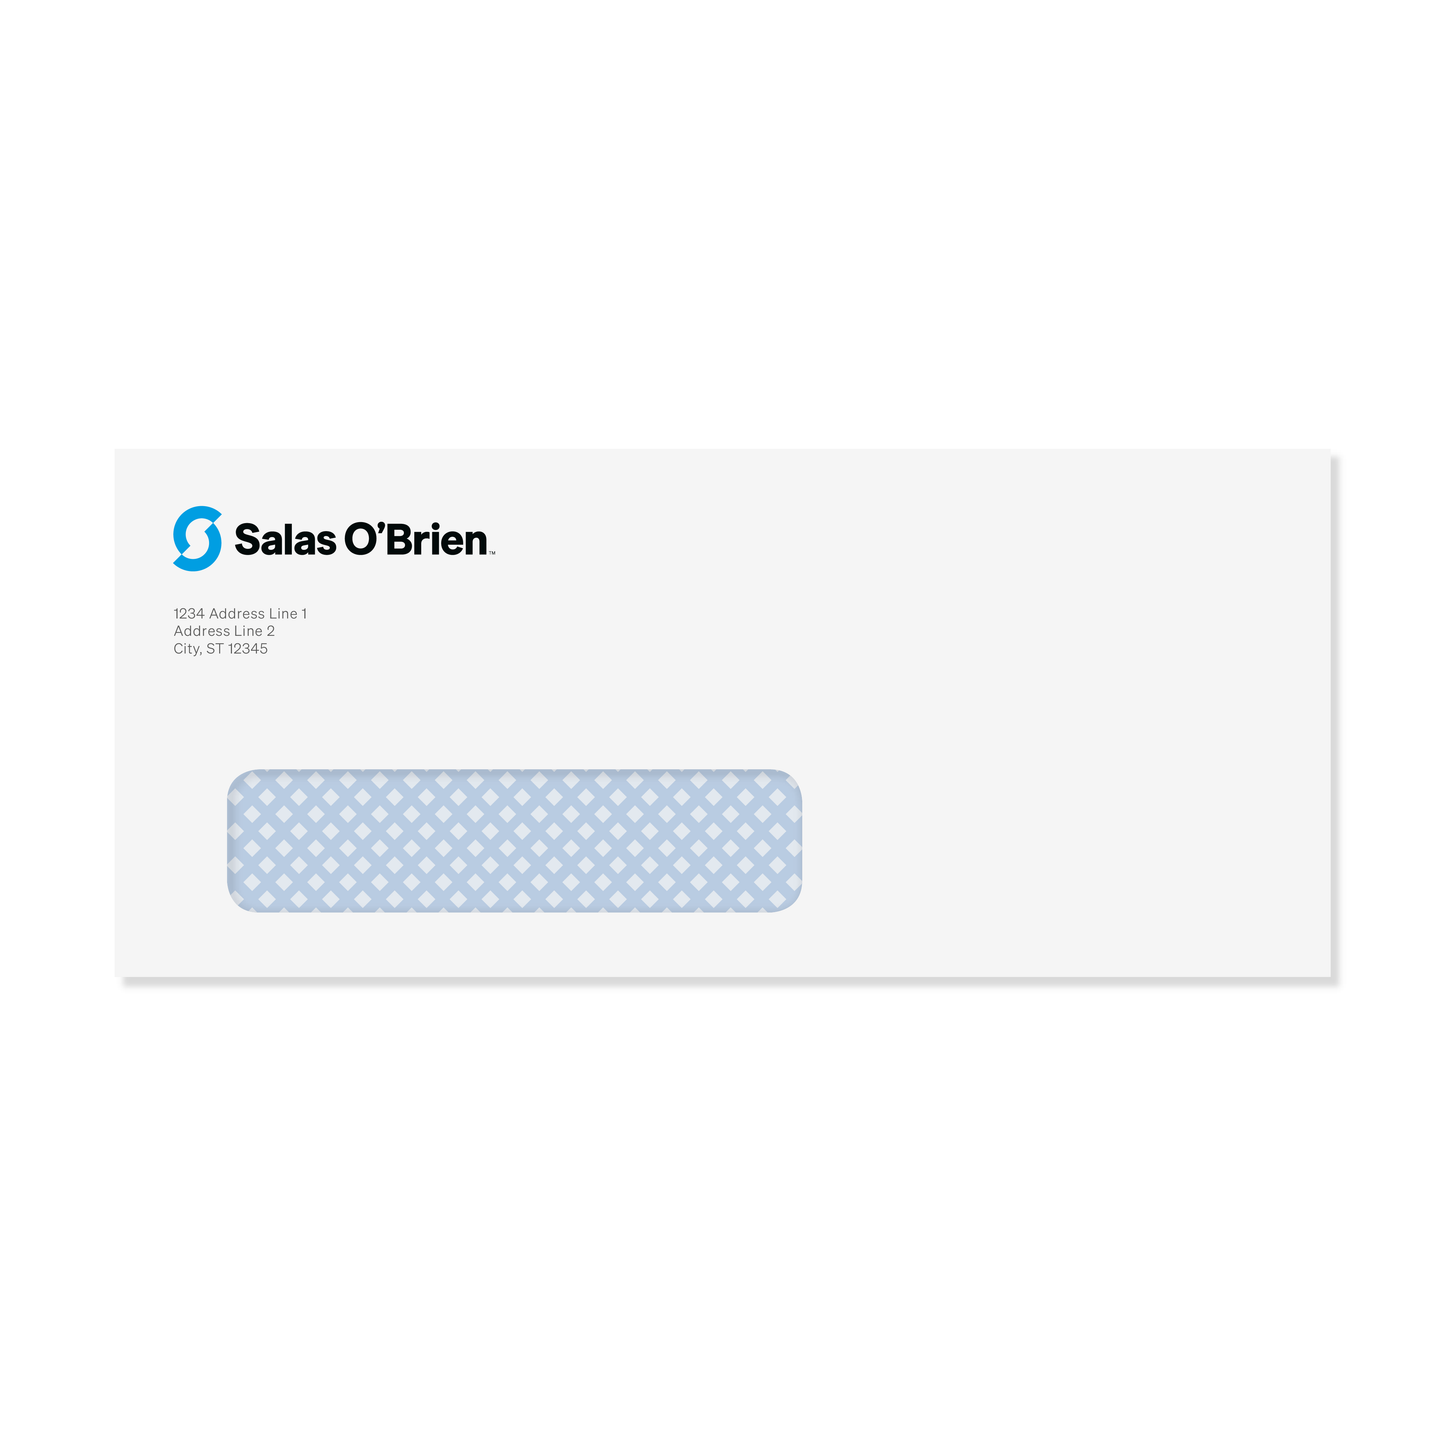 #10 Full Color Business Envelope with left window